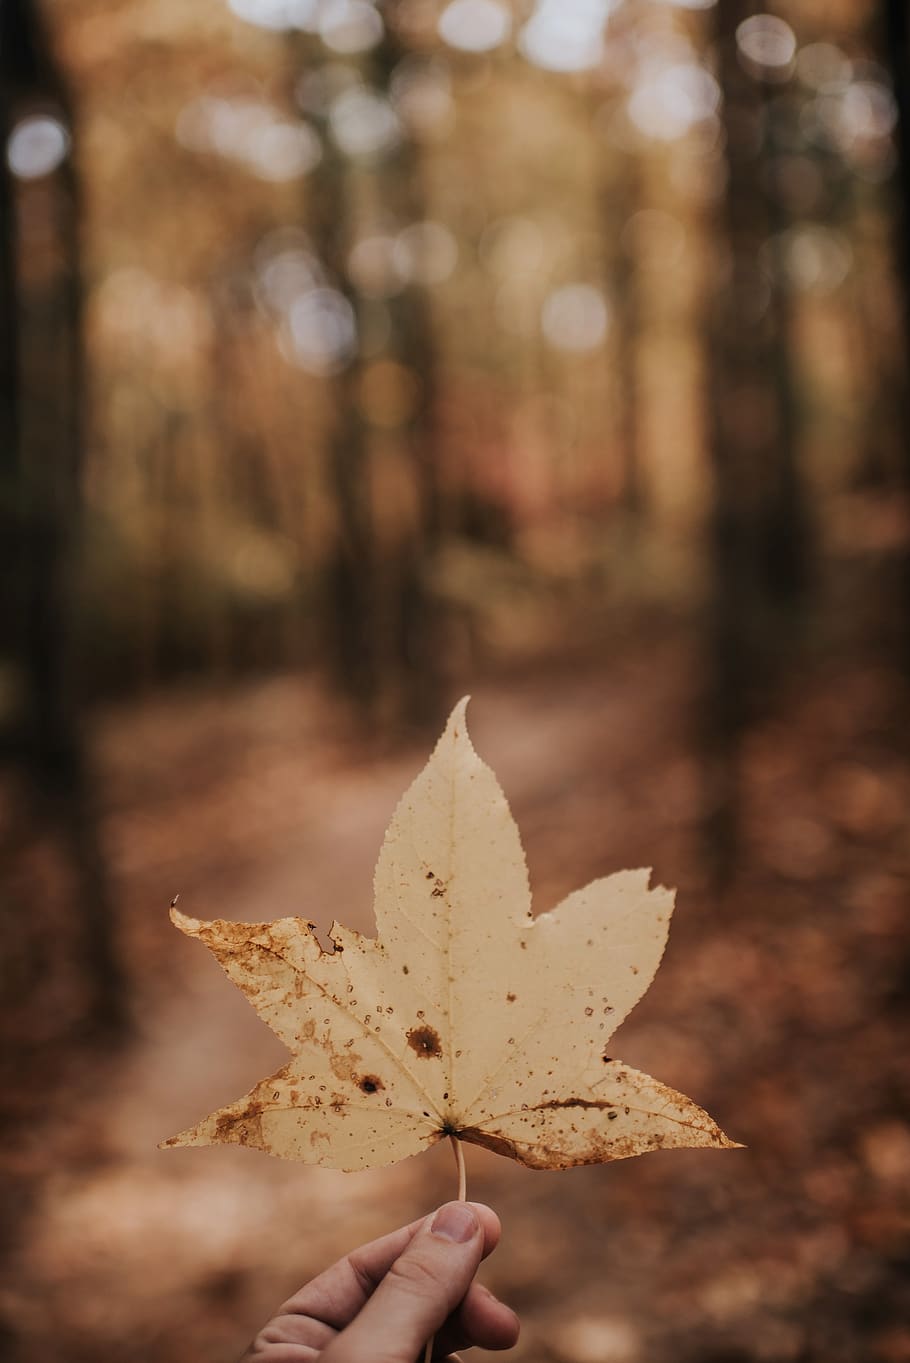 leaf, fall, autumn, hand, bokeh, human hand, human body part, one person, change, focus on foreground